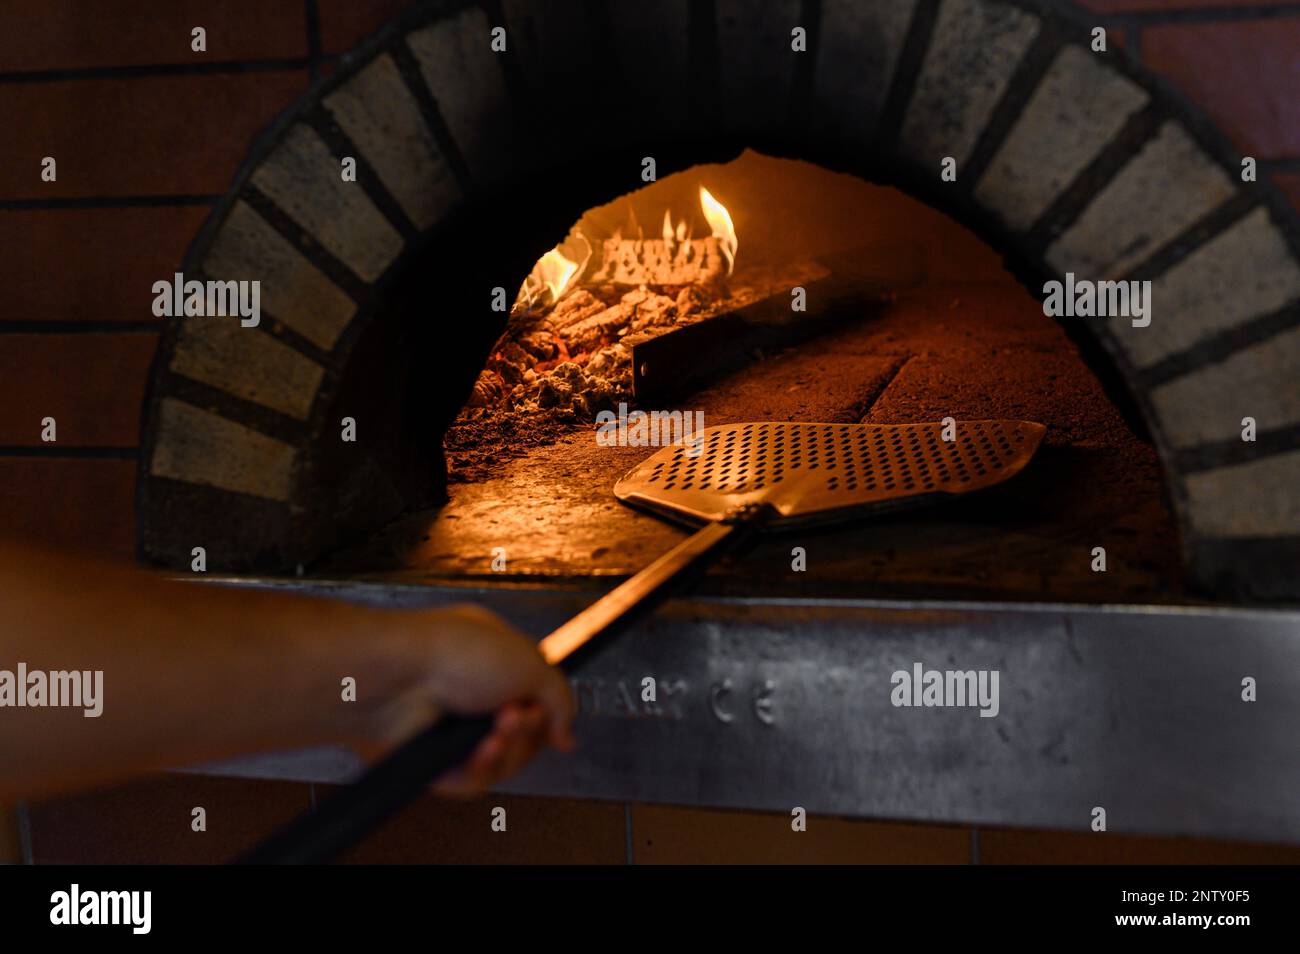 Pizza maker pushes the pizza on a wooden board into the stone oven. Burning firewood can be seen. Stock Photo